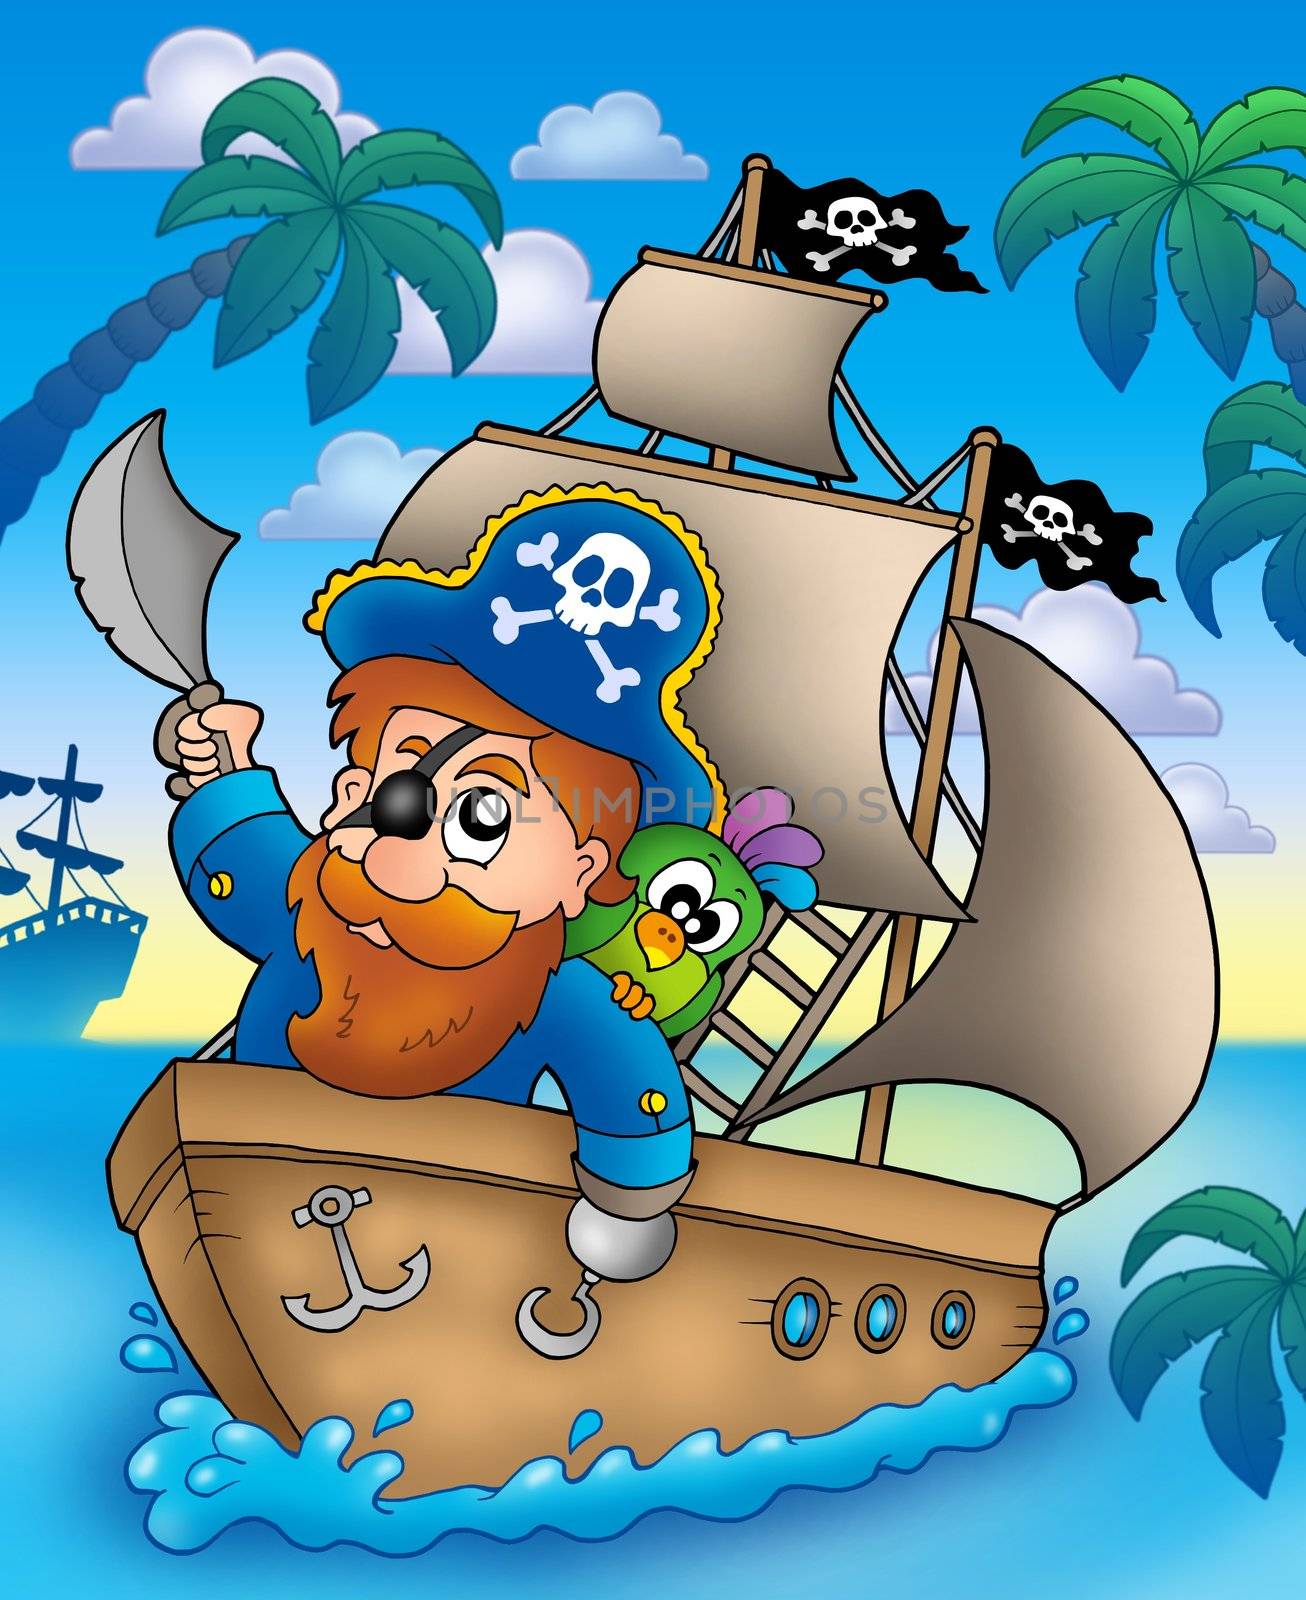 Cartoon pirate sailing on ship by clairev